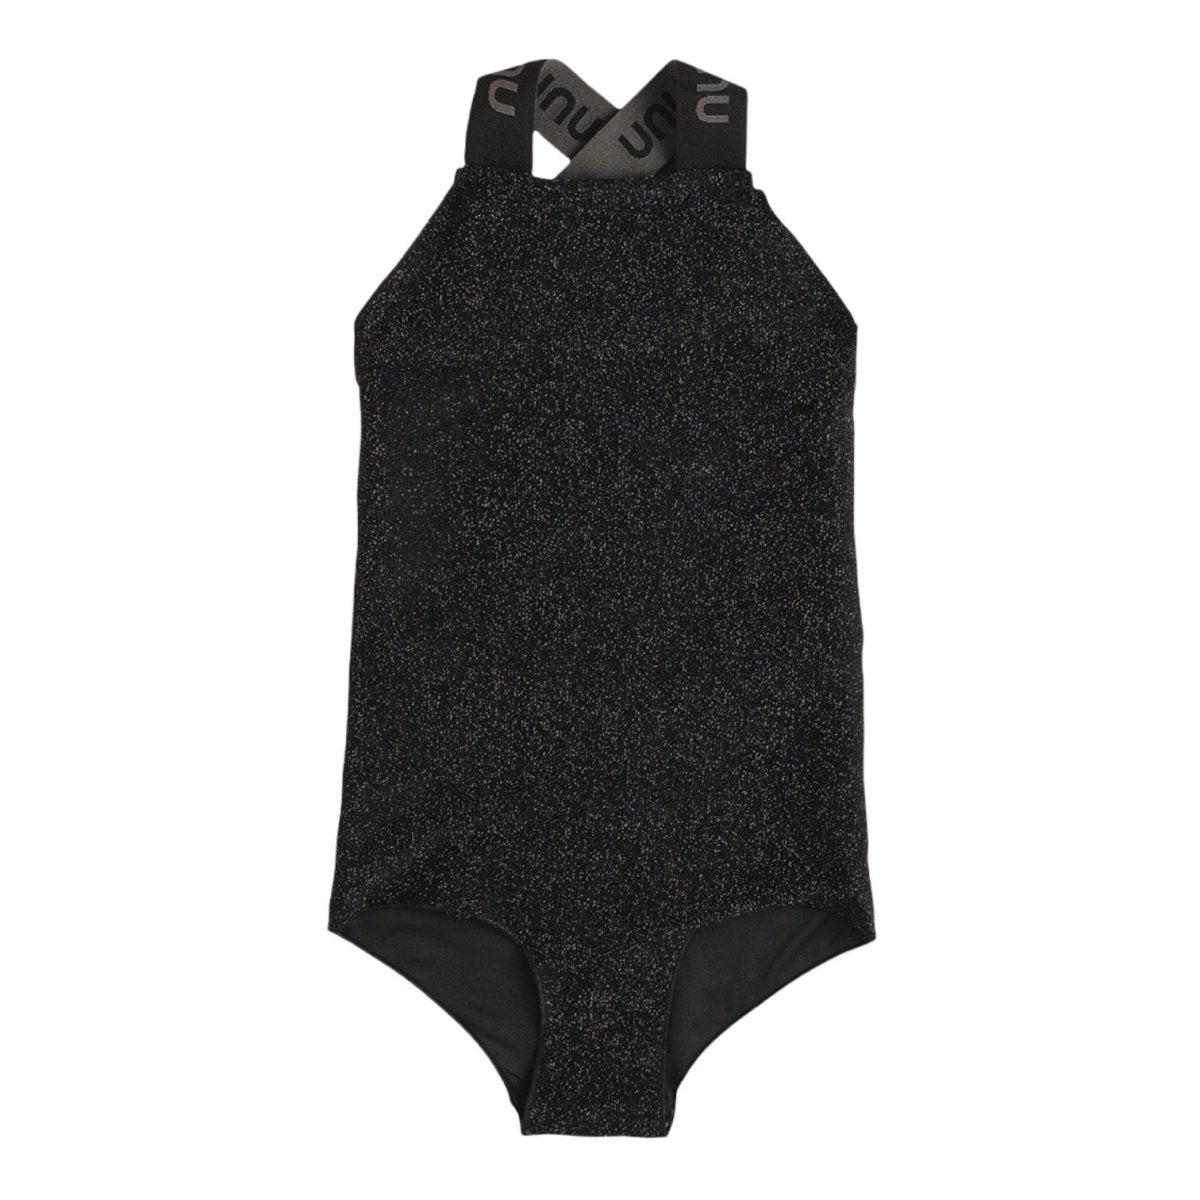 SPRINKLED SHIMMER SPORTY ONE PIECE SWIMSUIT - ONE PIECE SWIMSUIT